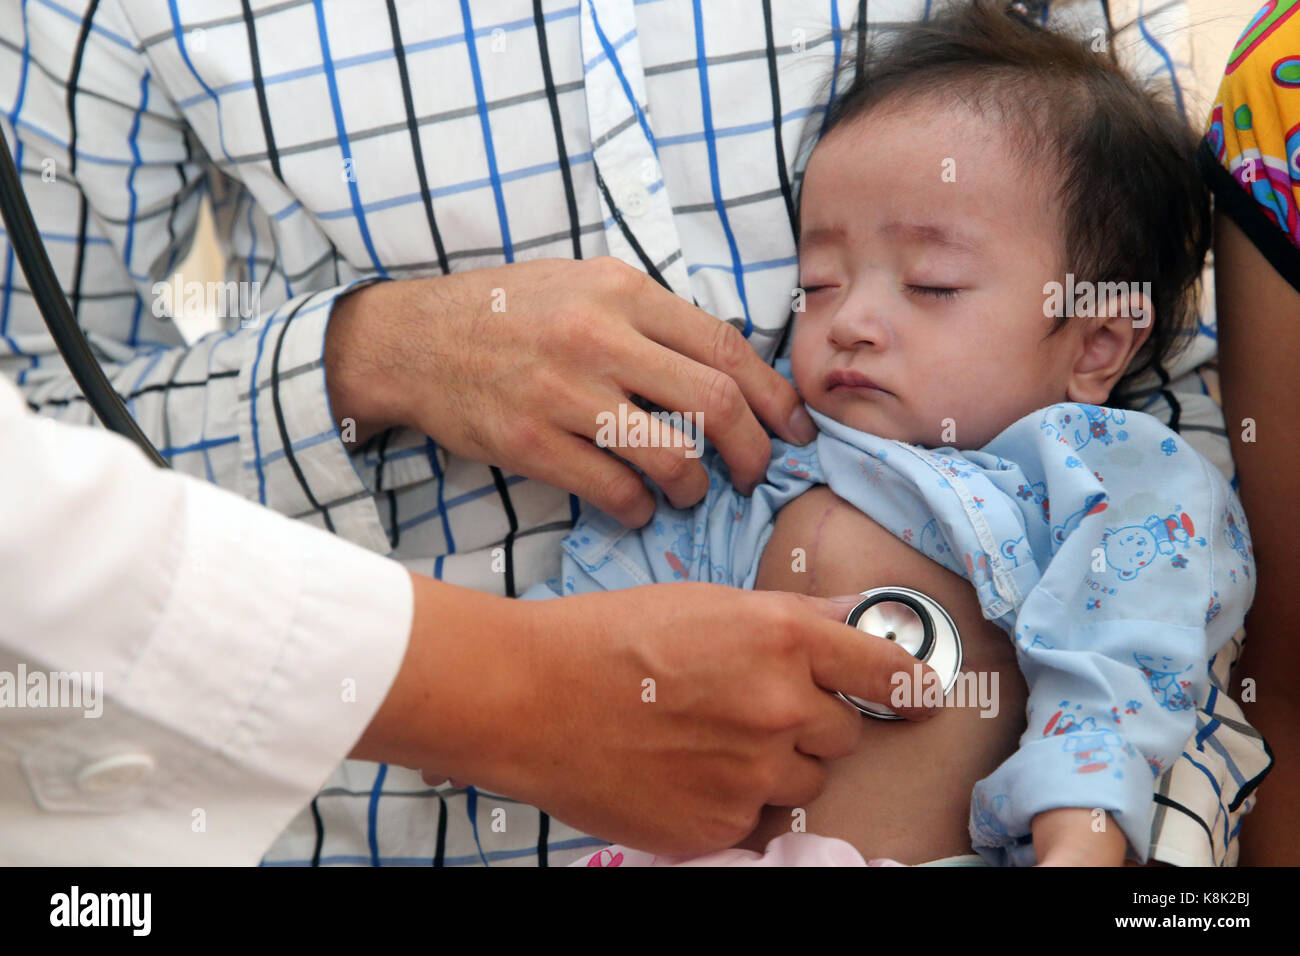 Tam duc heart hospital. doctor listening to young girl's heart. ho chi minh city. vietnam. Stock Photo